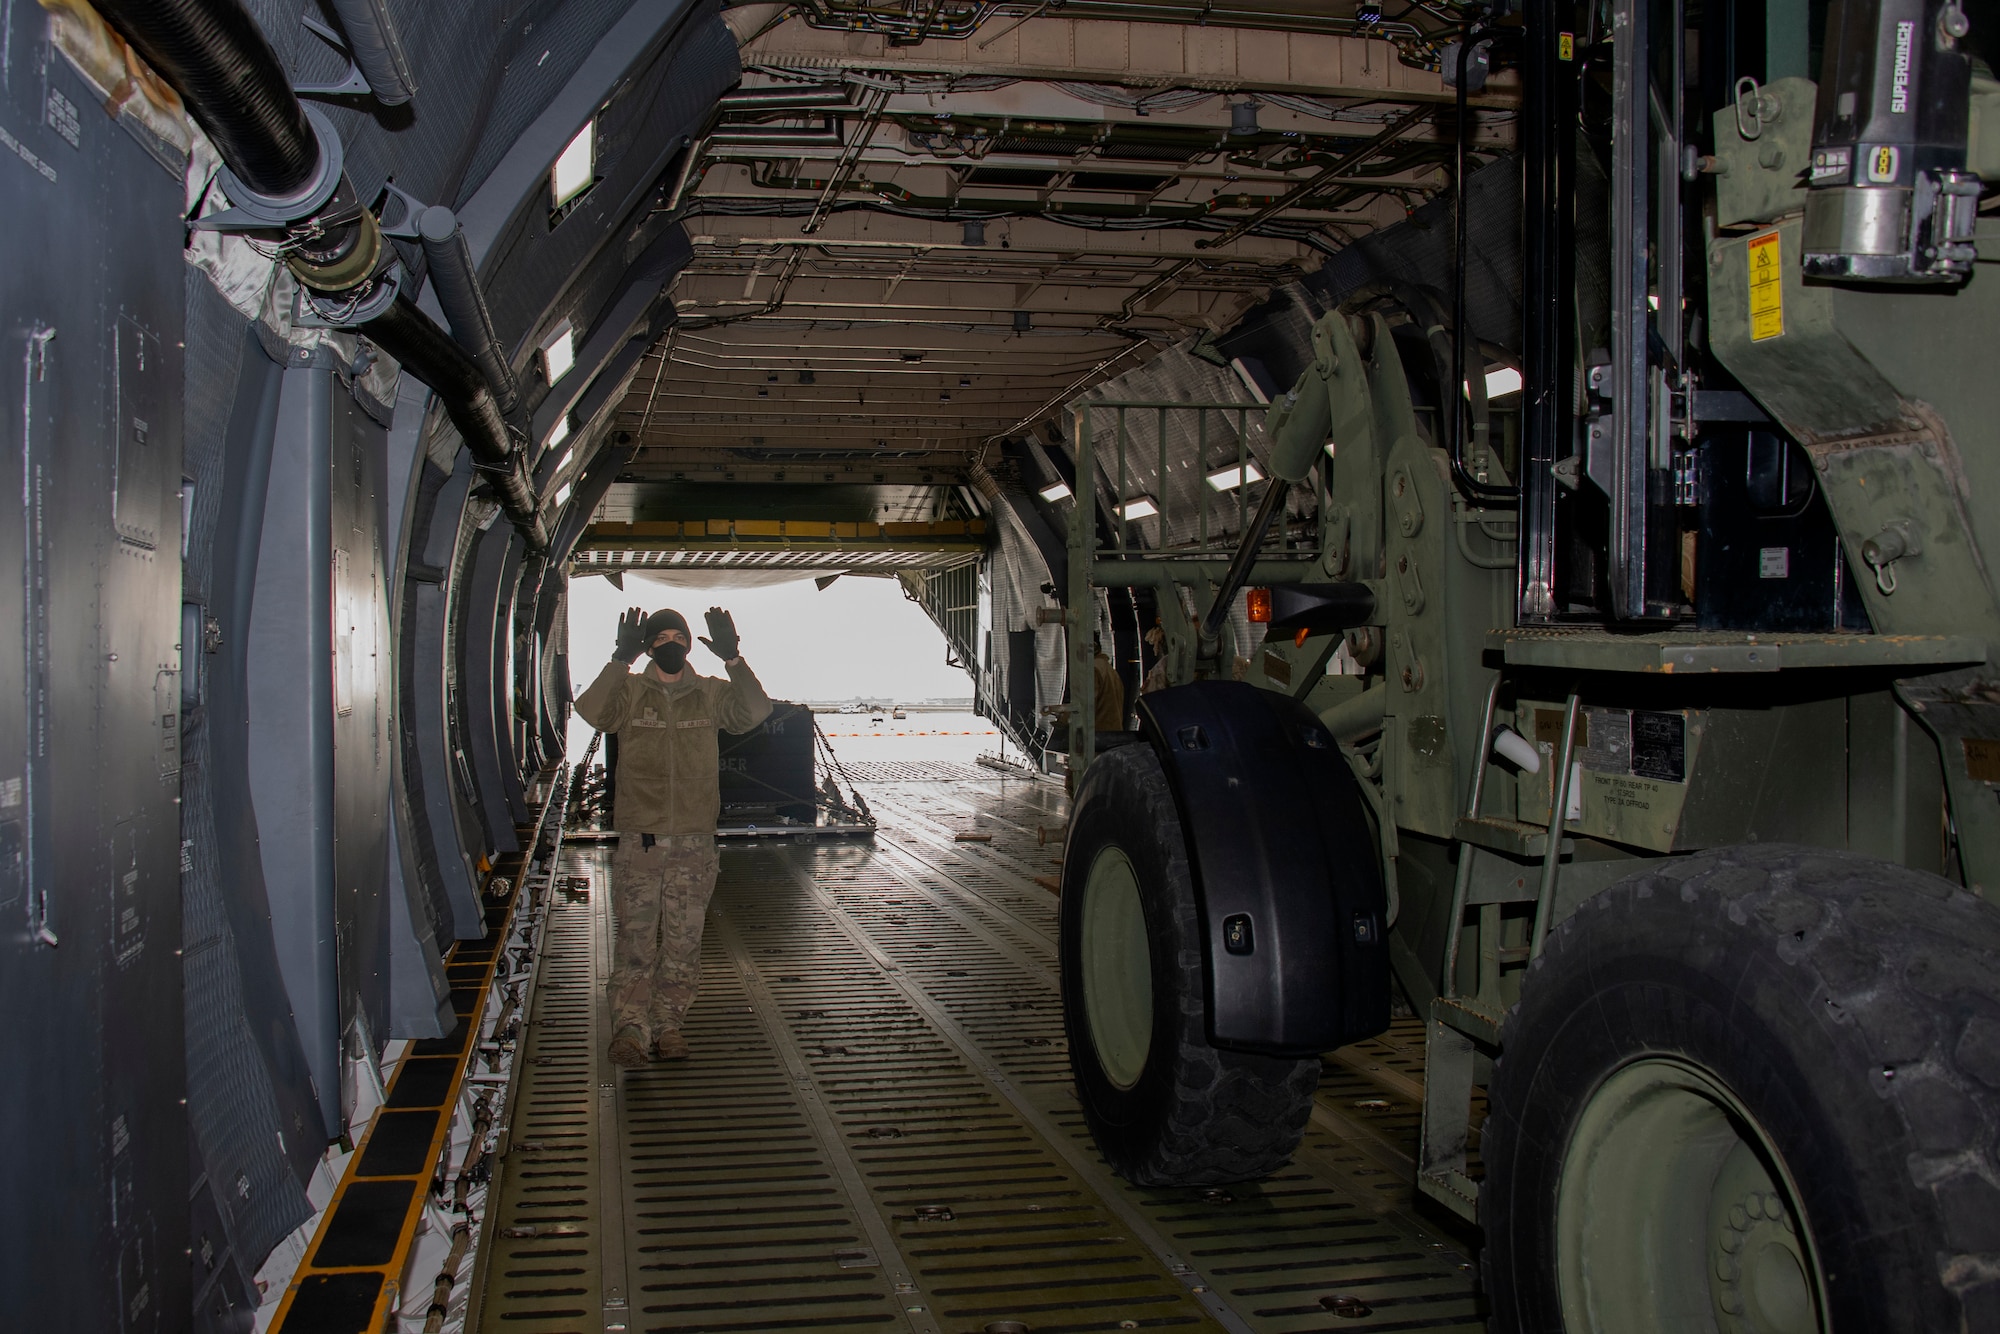 22nd AS teams up with 821st CRG to quicken loadmaster qualification training